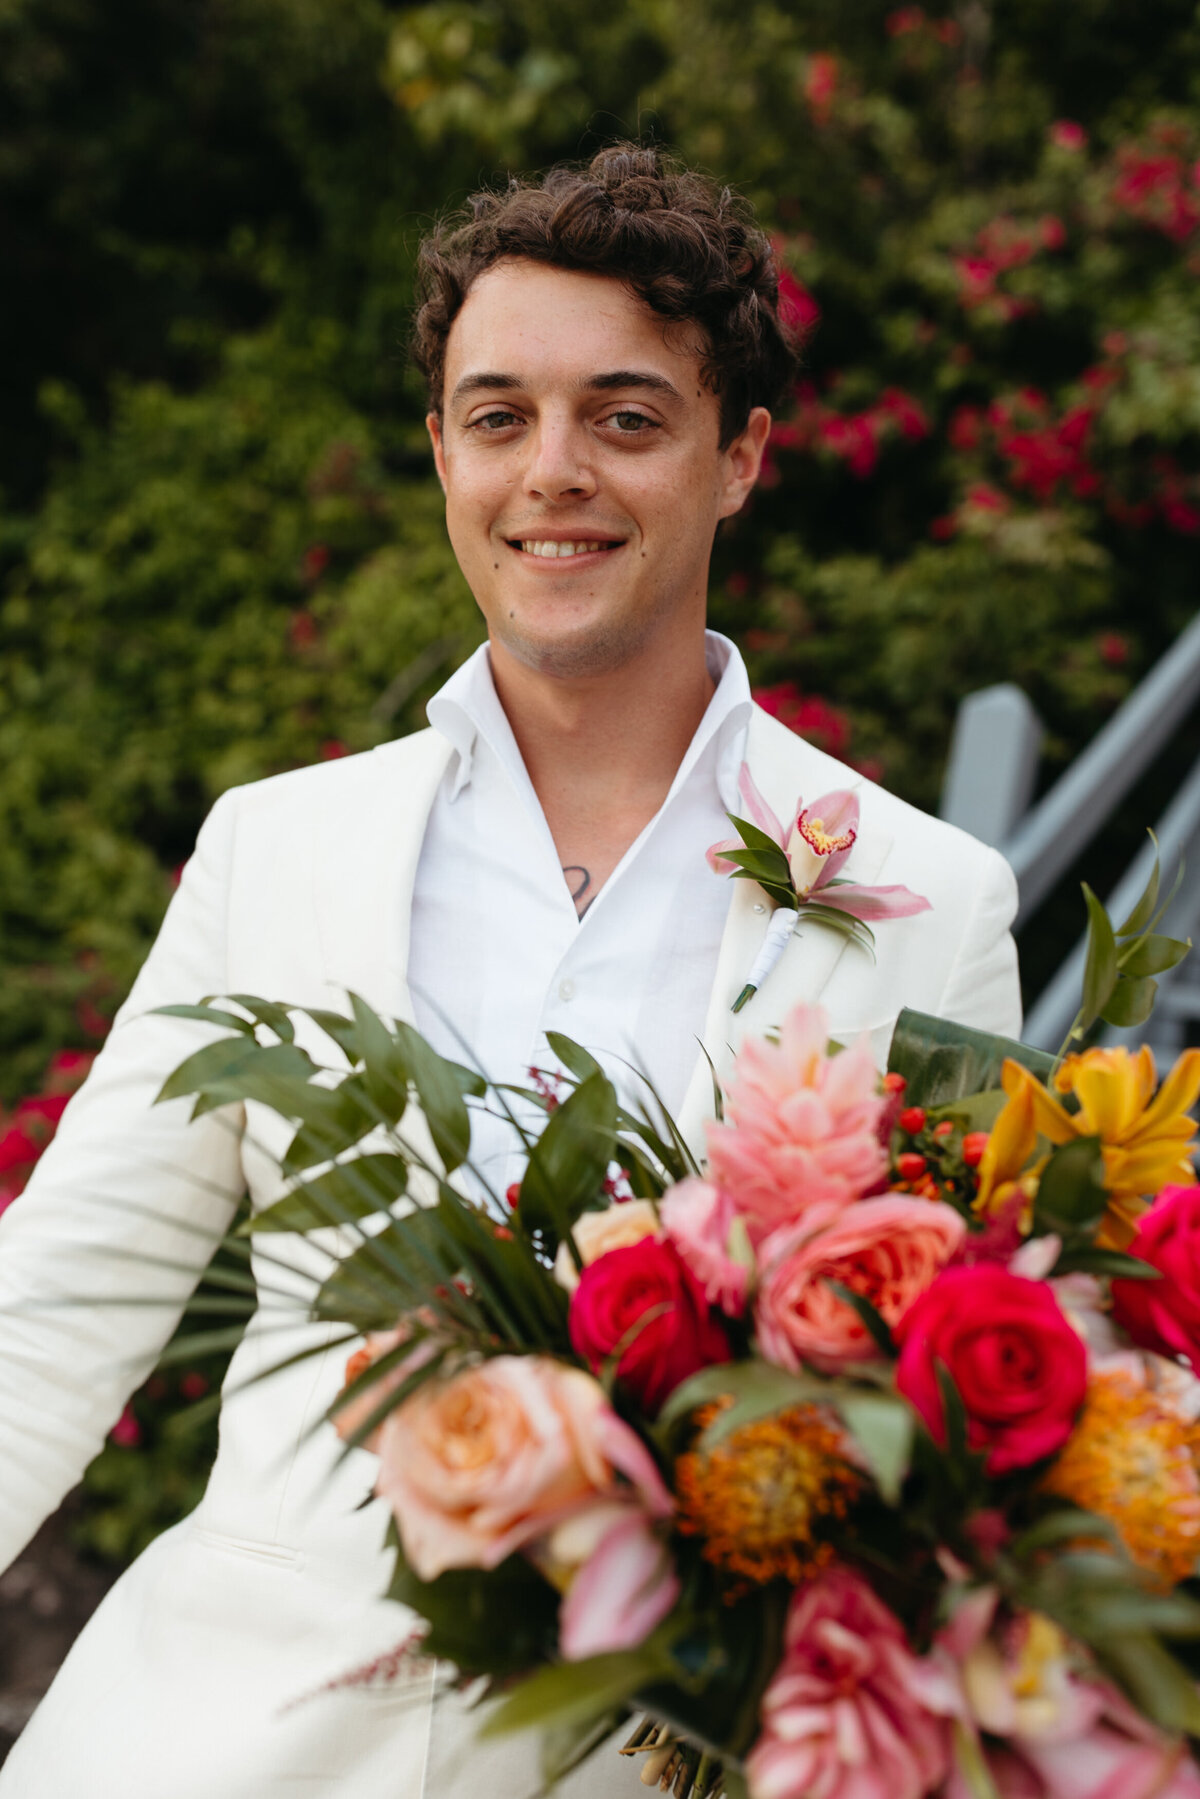 Groom holding a vibrant wedding bouquet, smiling warmly, with his white suit contrasting against the colorful flowers